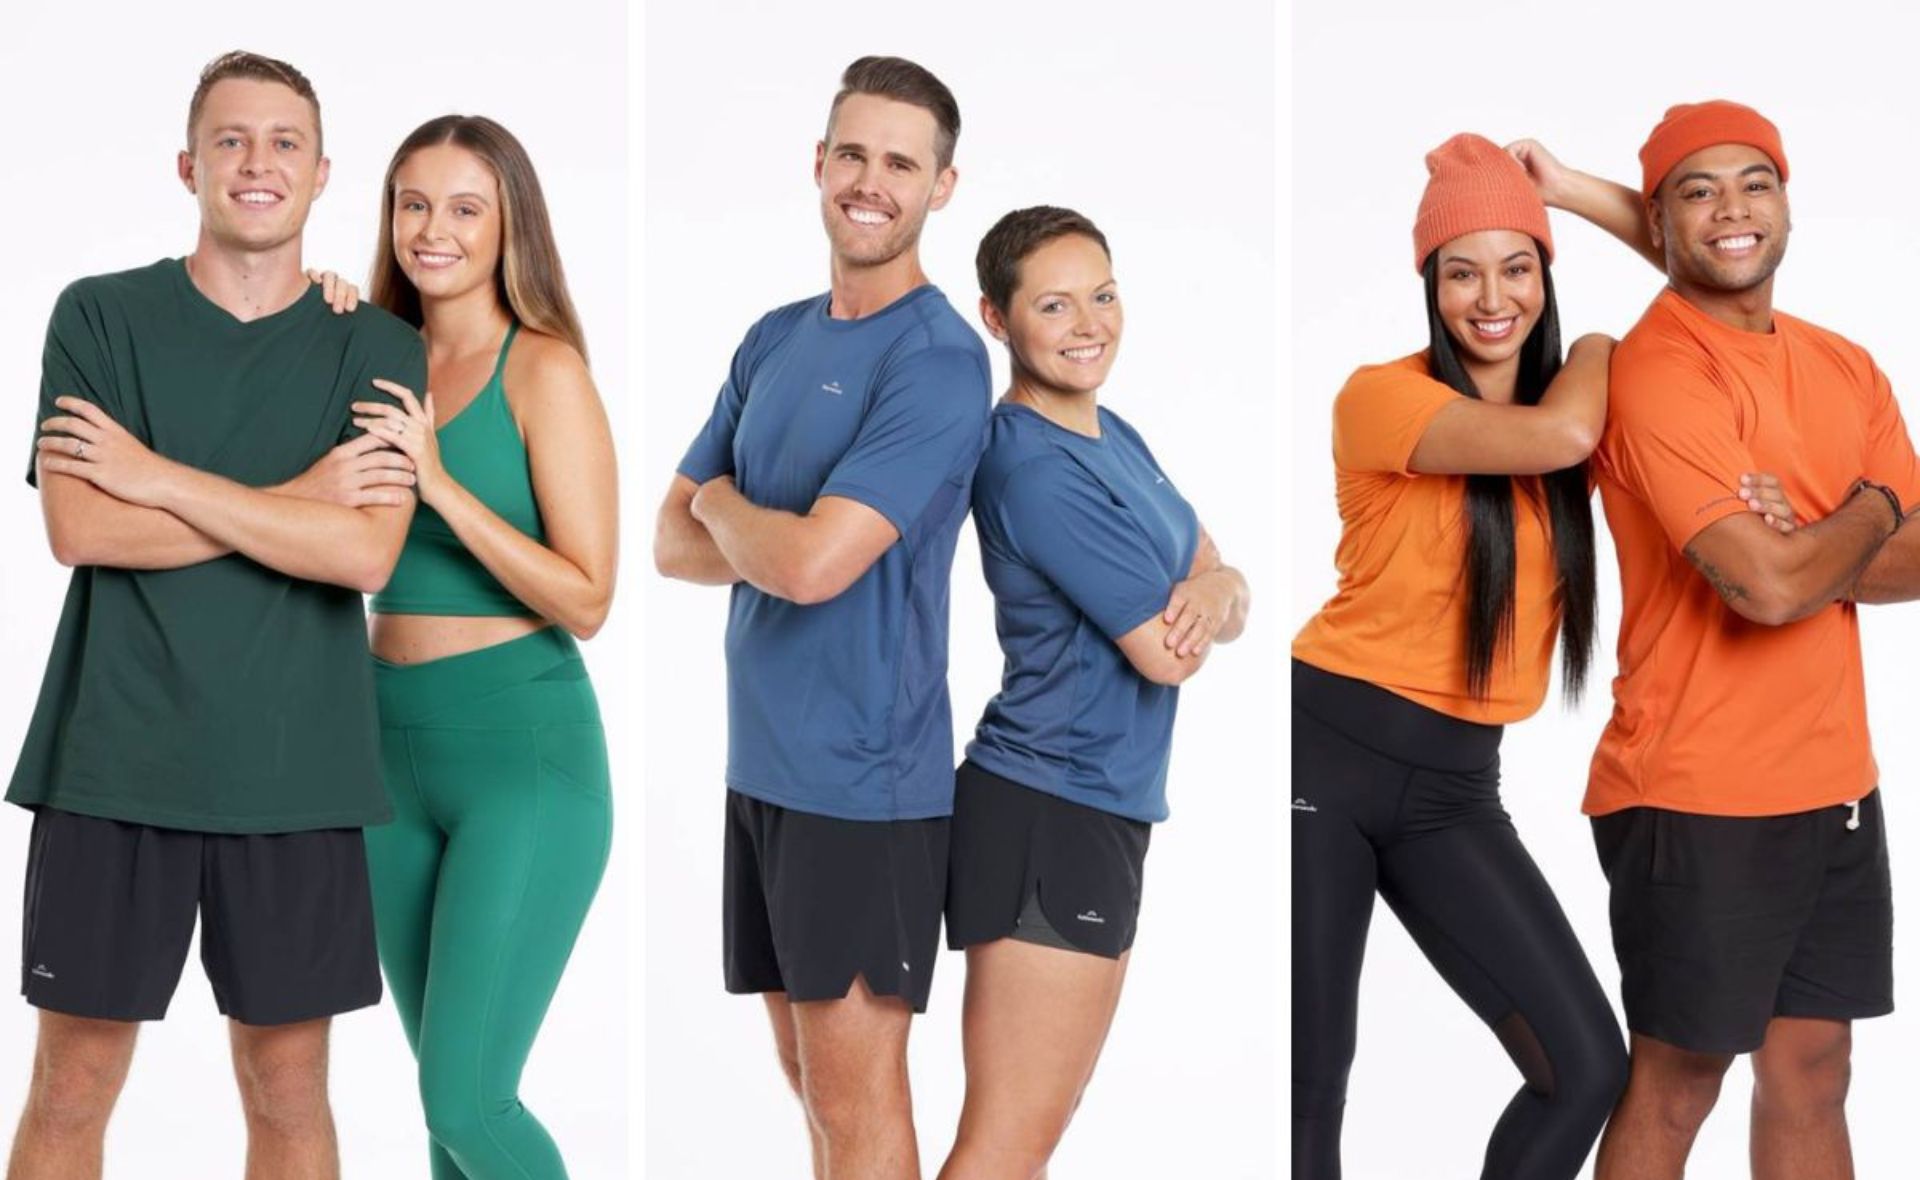 The race is over! And the winner of The Amazing Race Australia 2022 is…